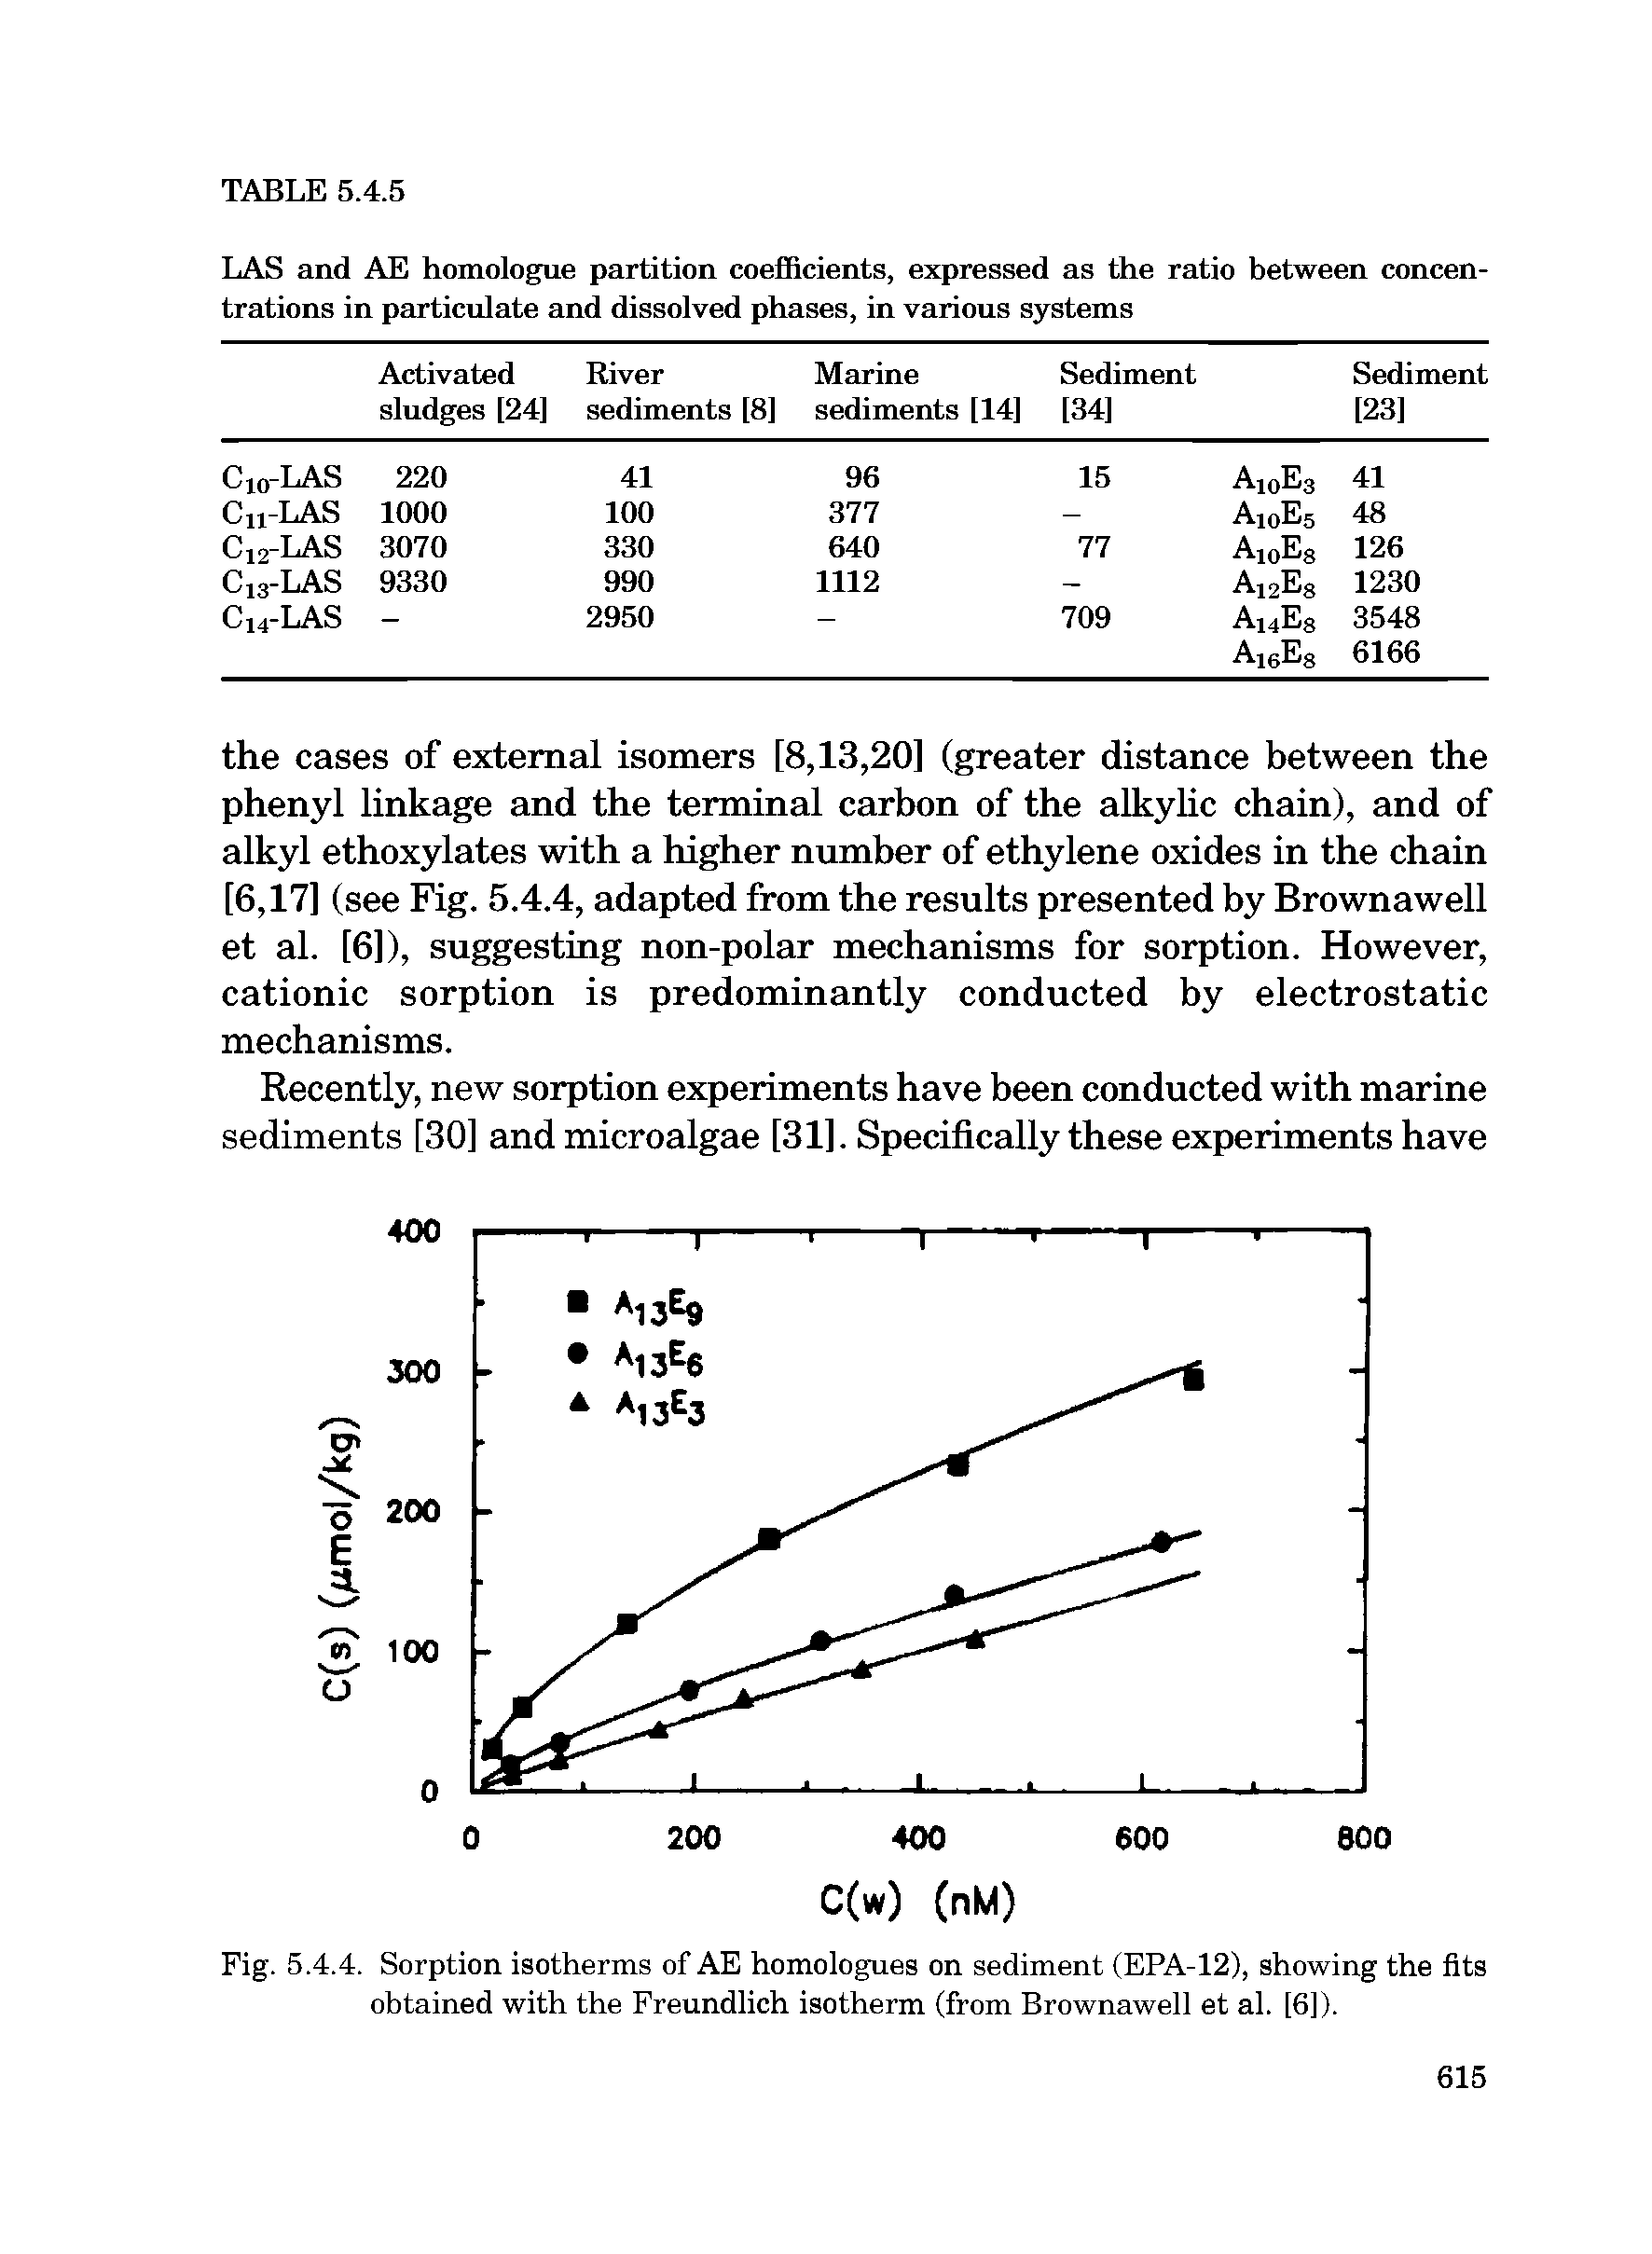 Fig. 5.4.4. Sorption isotherms of AE homologues on sediment (EPA-12), showing the fits obtained with the Freundlich isotherm (from Brownawell et al. [6]).